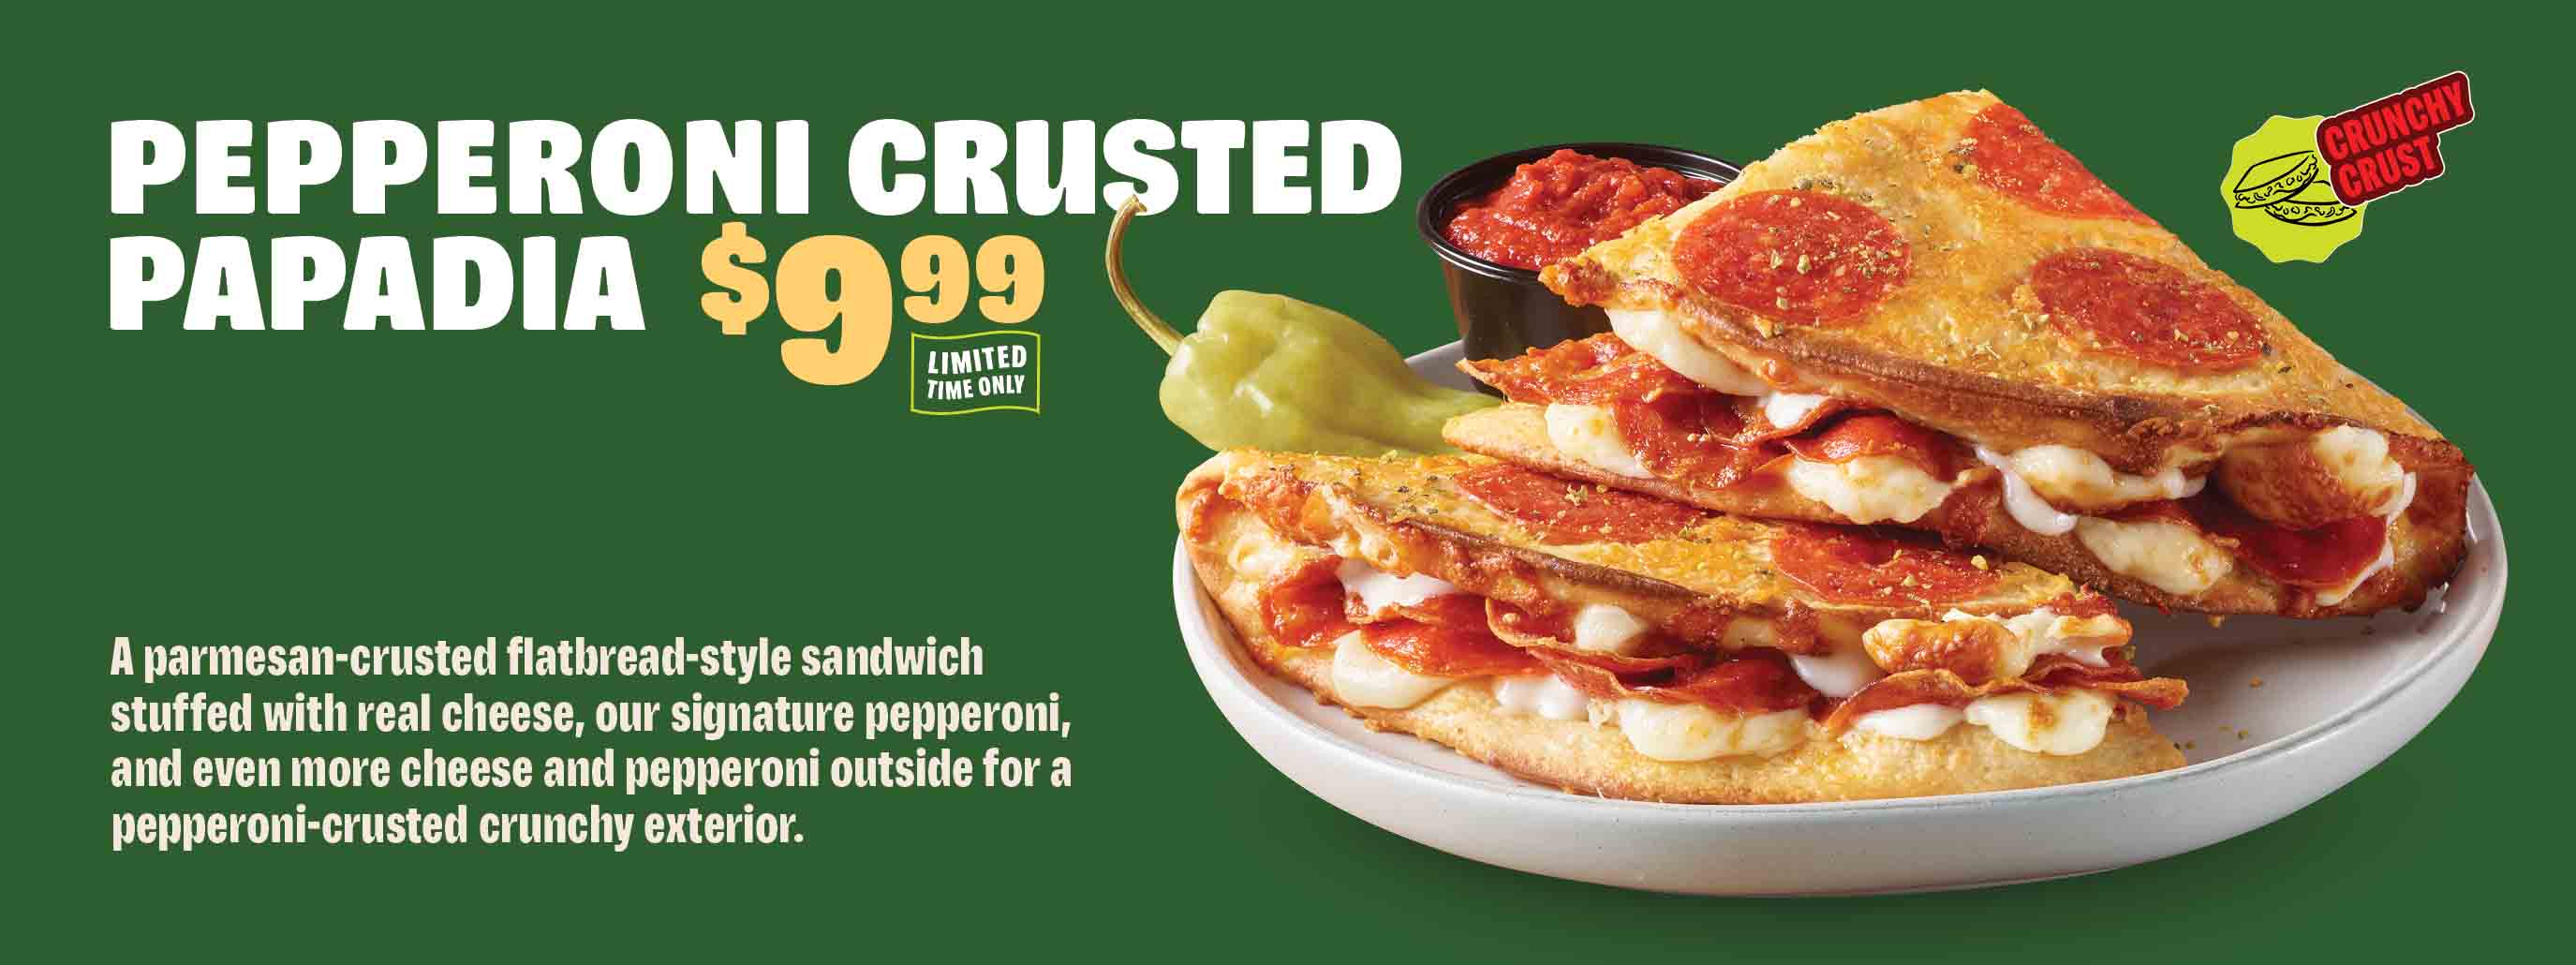 PEPPERONI CRUSTED PAPADIA, $9.99, LIMITED TIME ONLY